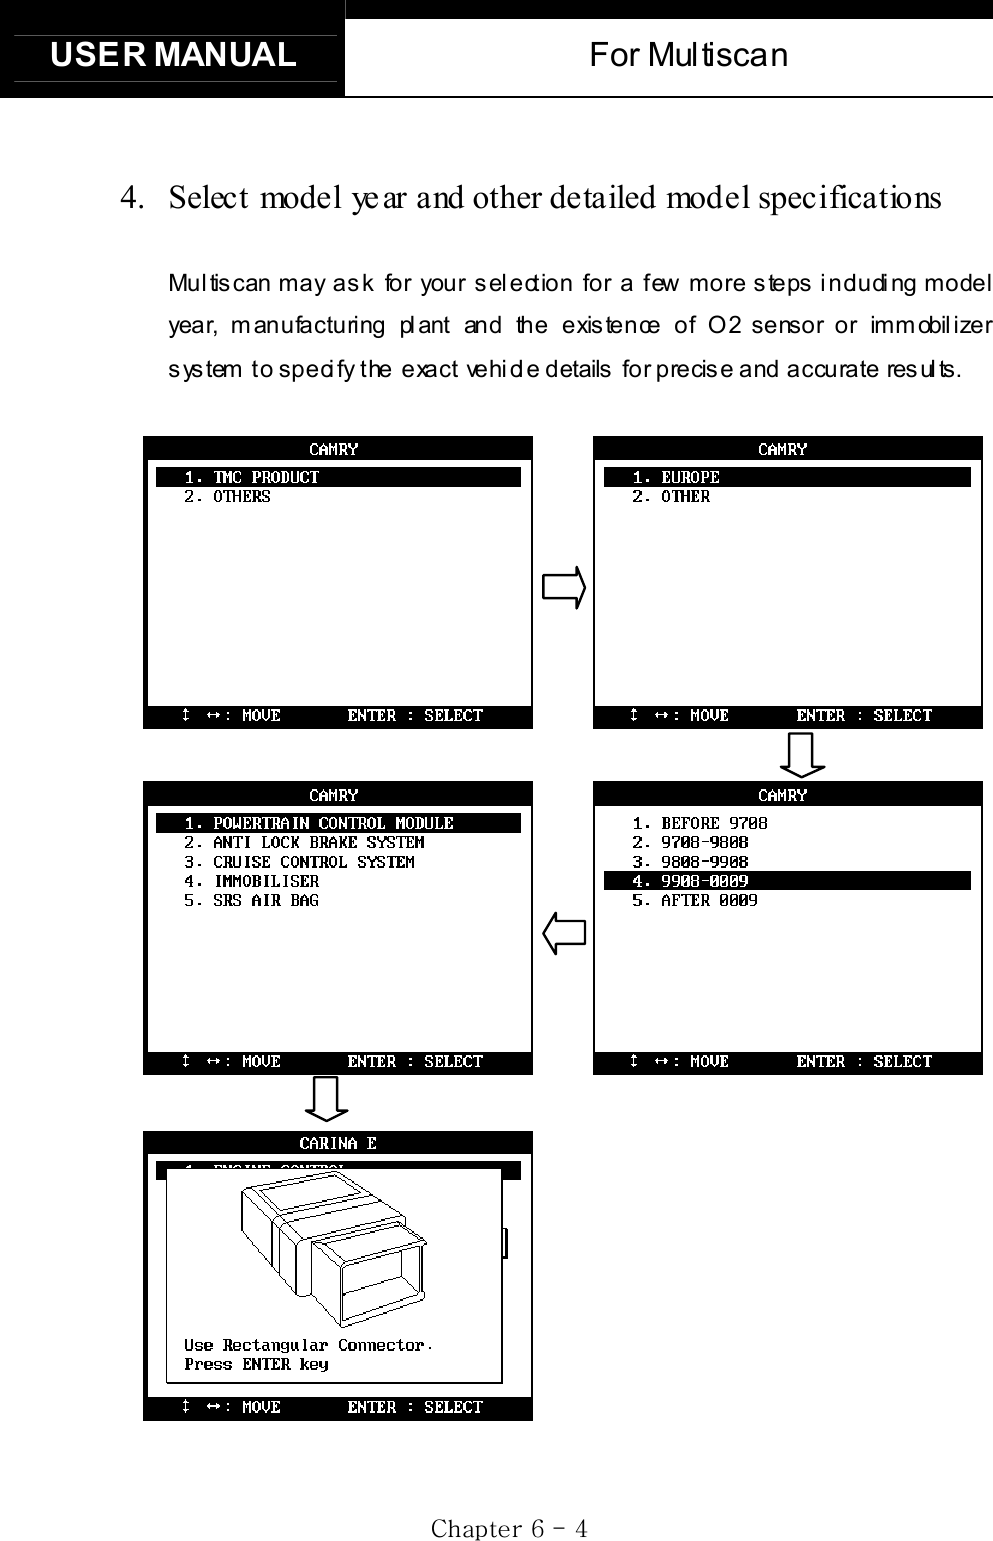 USER MANUAL  For Multiscan GjG]GTG [G4.  Select model ye ar and other detailed model specifications   Multiscan may ask for your selection for a few more steps including model year, manufacturing plant and the existence of O2 sensor or immobilizer system to specify the  exact  vehicle details  for precise and accurate  results.           G